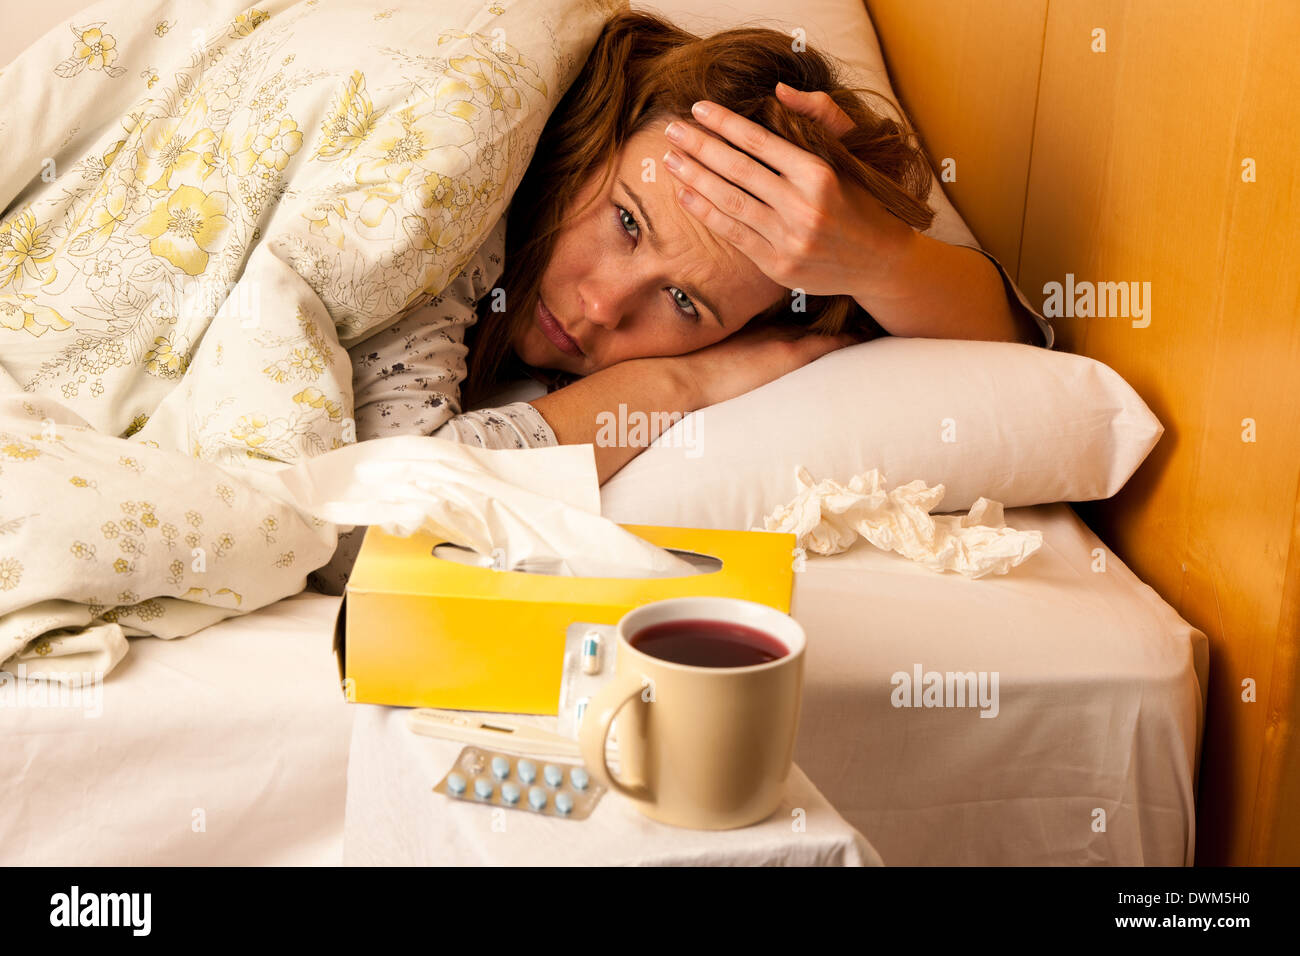 Woman with flu resting in bed Stock Photo